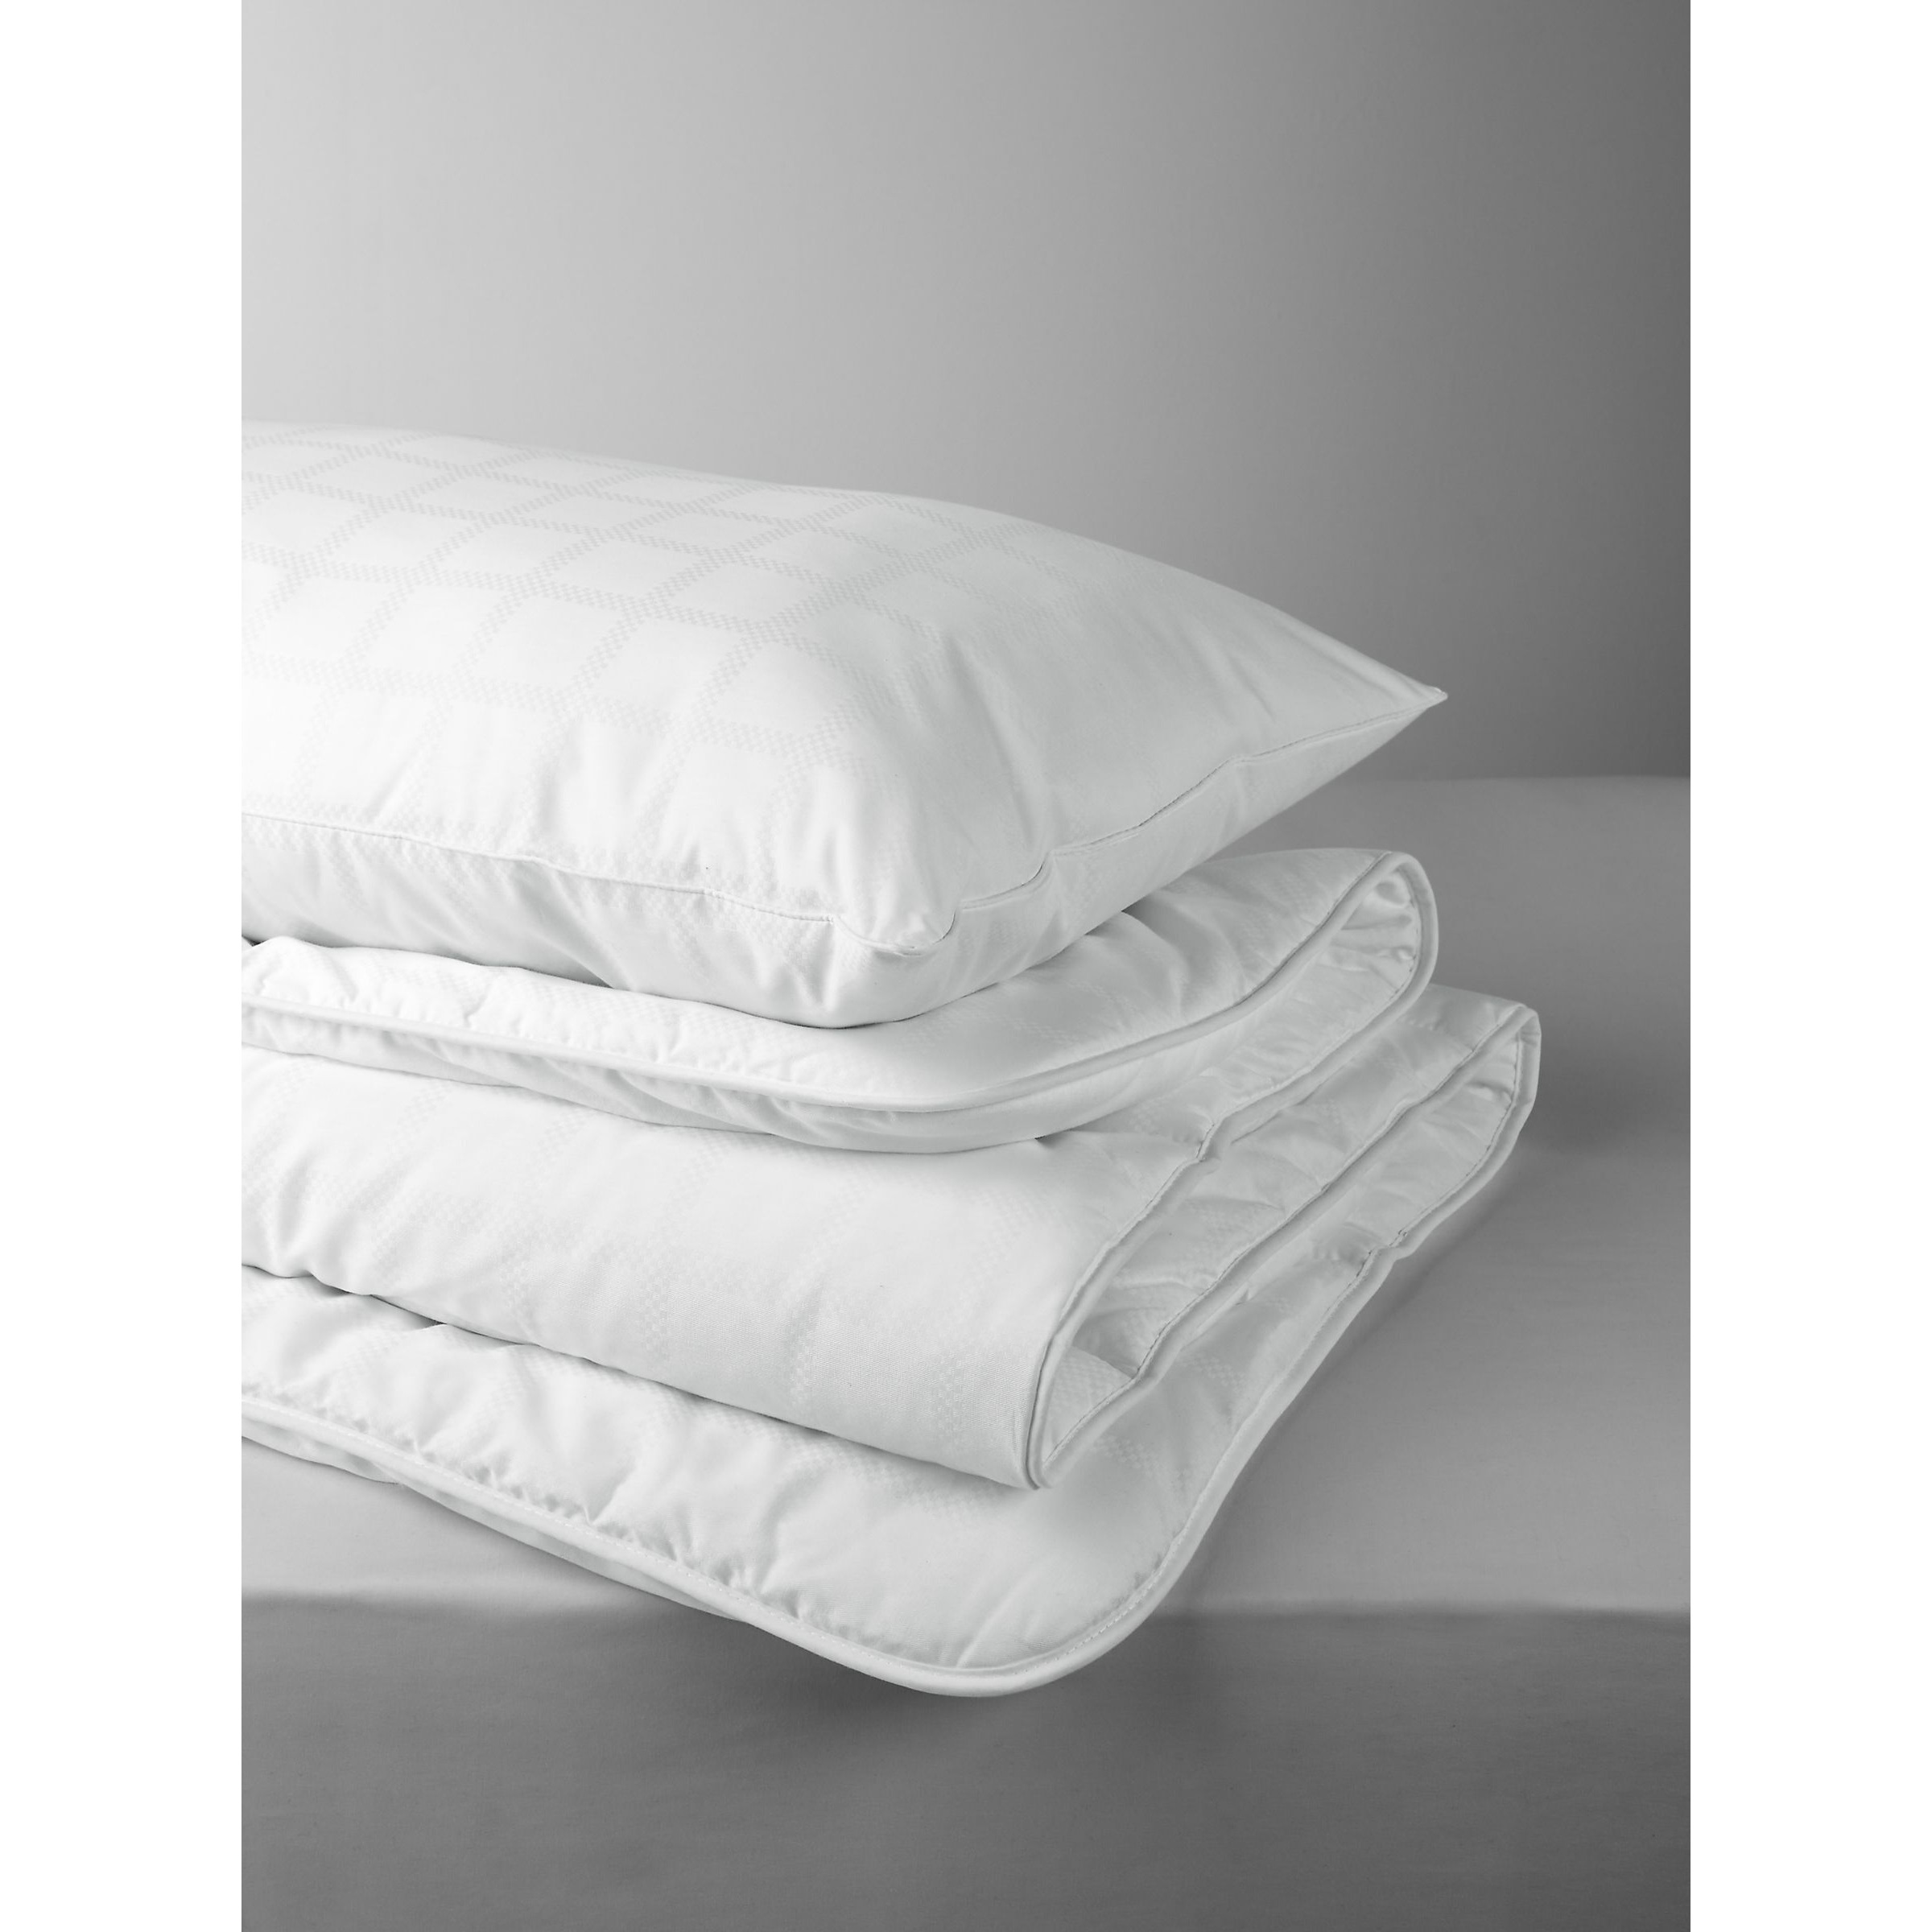 little home at John Lewis Active Anti-Allergy with HeiQ Allergen Tech* Duvet and Pillow Set, 10.5 Tog, White, Single - image 1